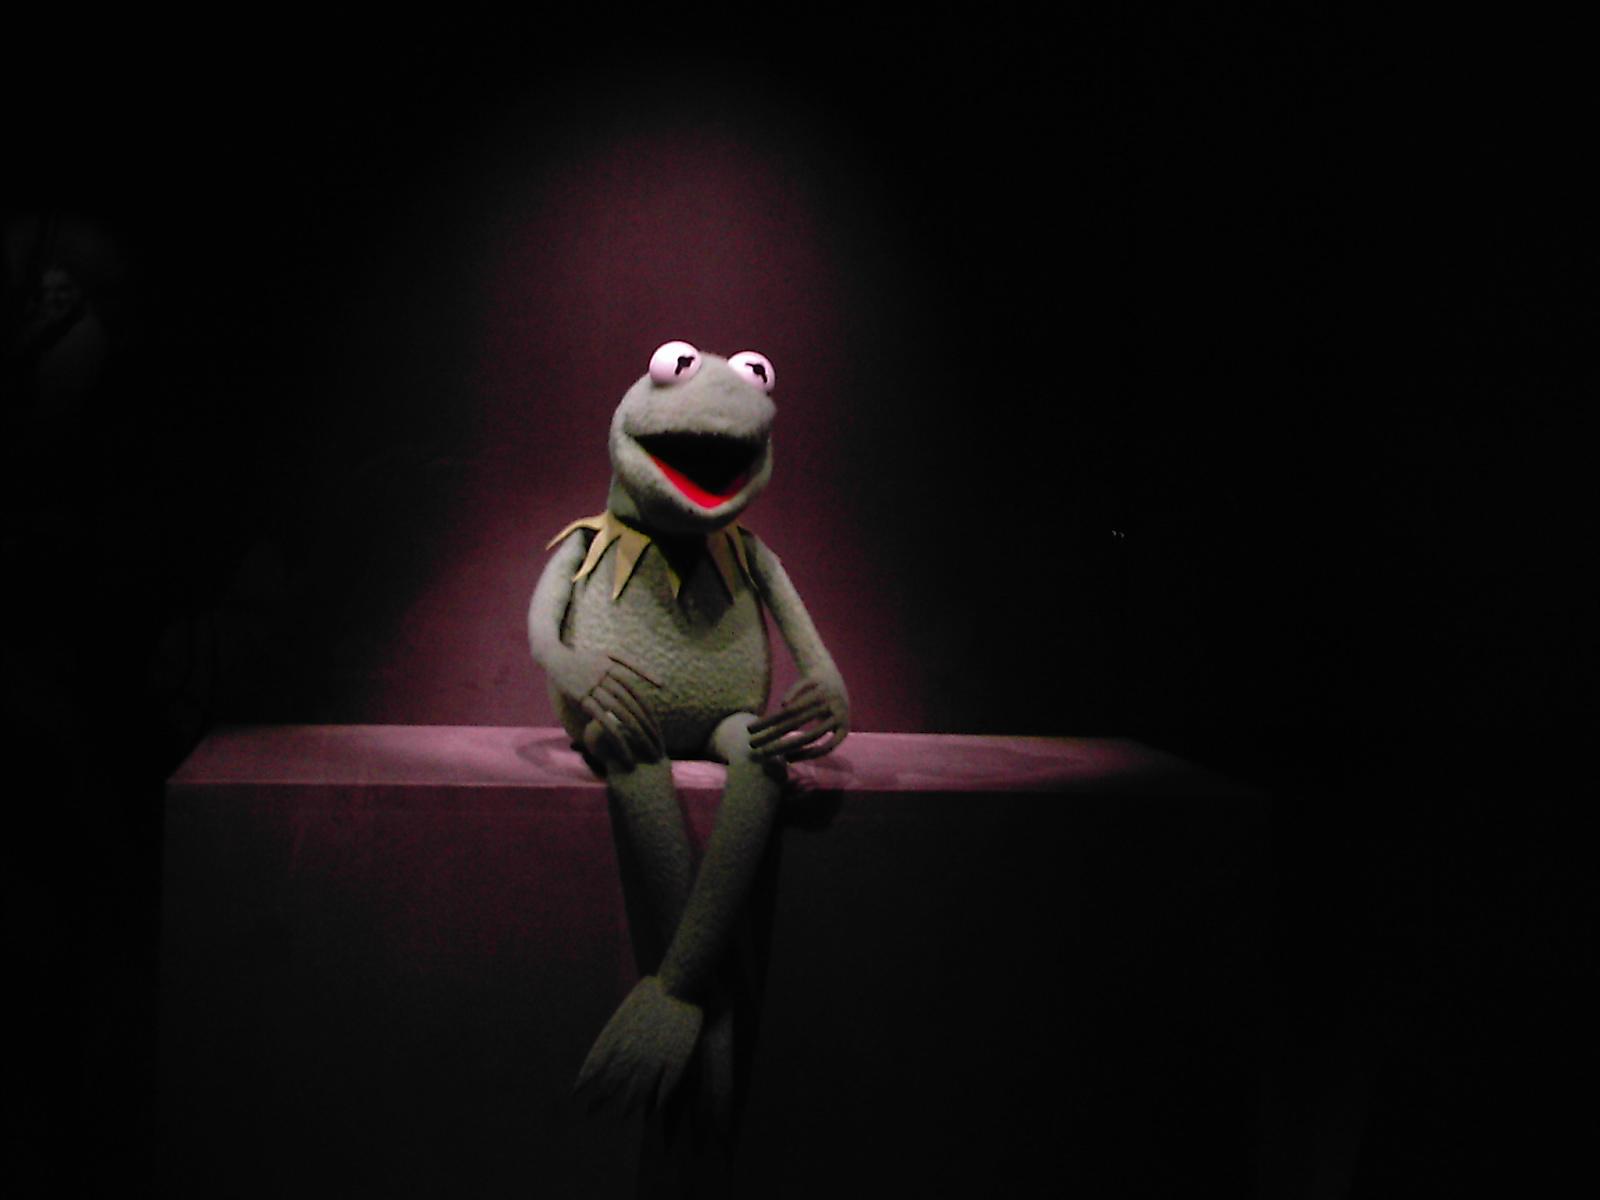 Kermit the Frog Background. Funny Frog